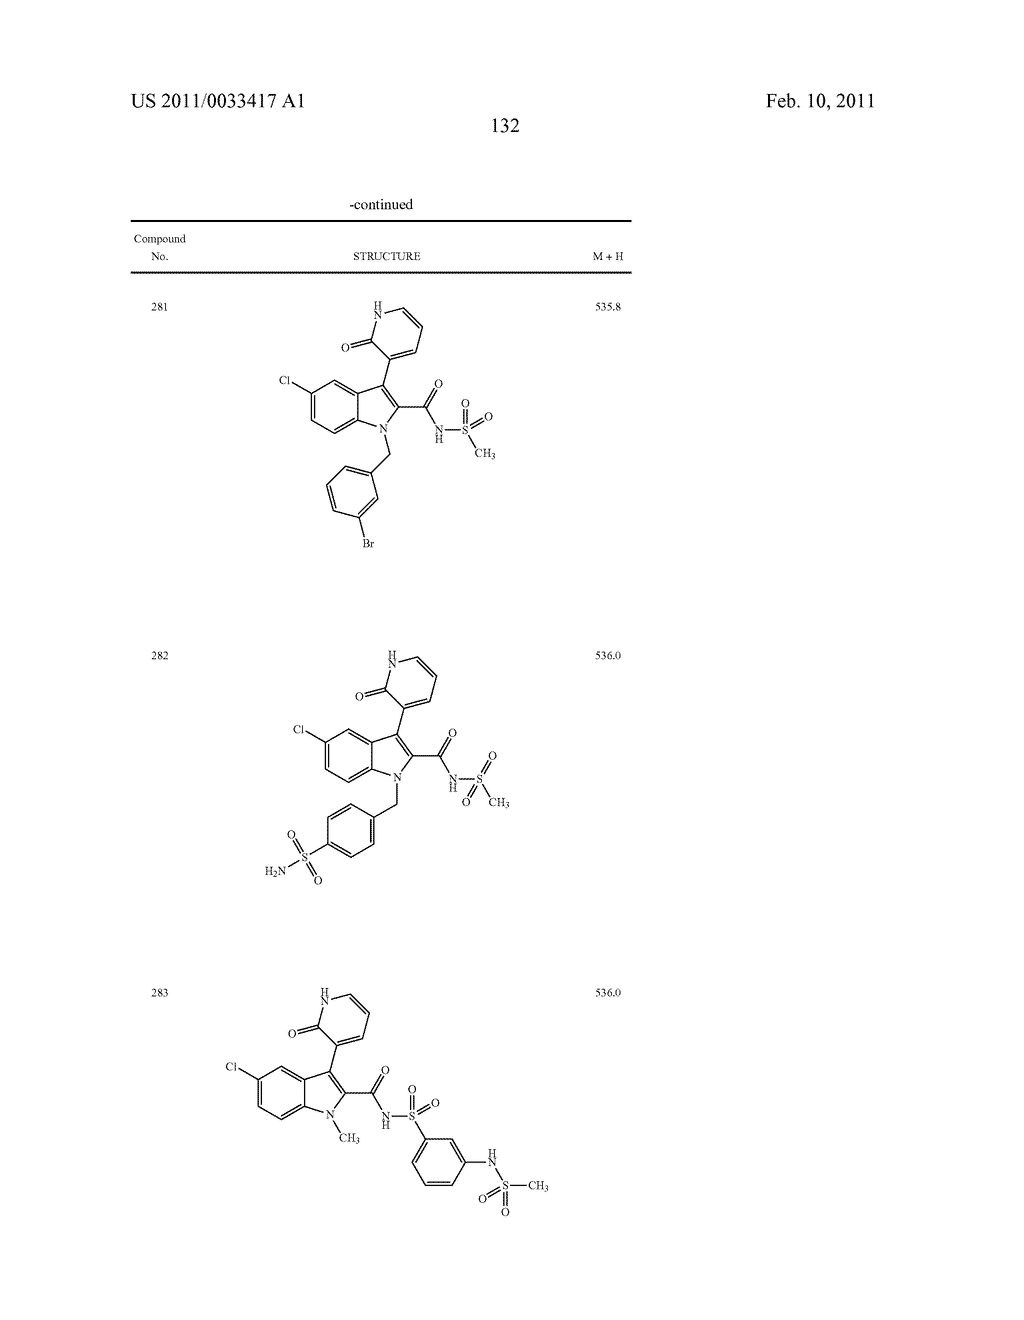 2,3-SUBSTITUTED INDOLE DERIVATIVES FOR TREATING VIRAL INFECTIONS - diagram, schematic, and image 133